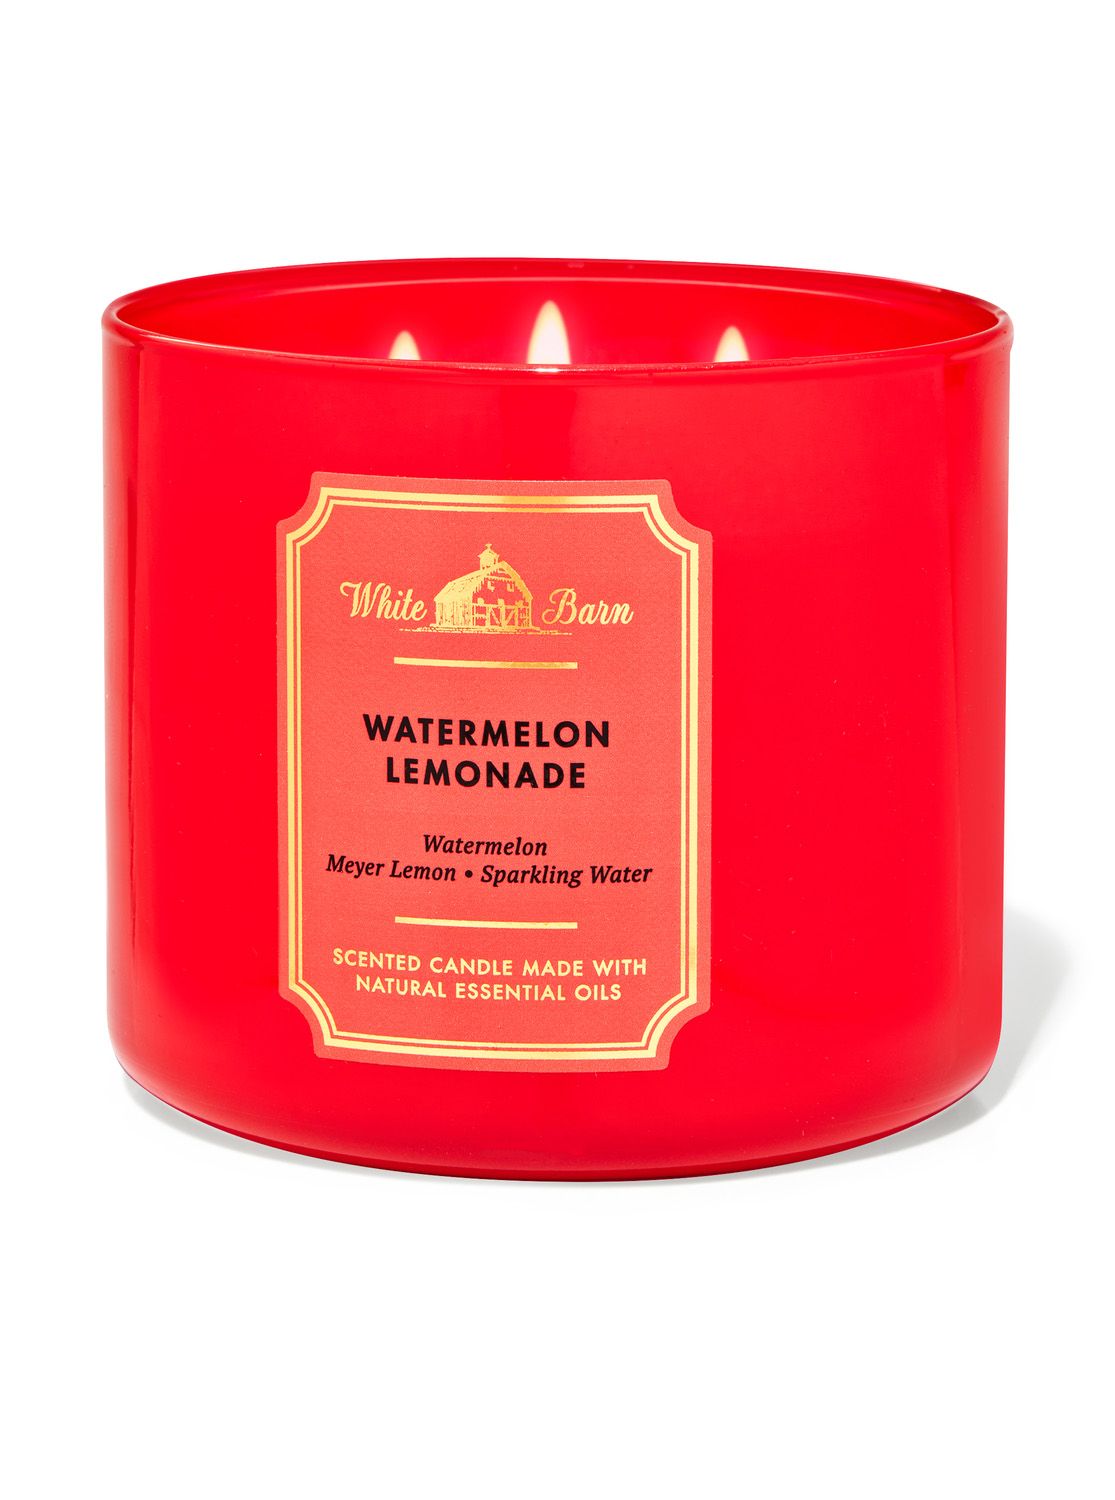 Bath & Body Works Watermelon Lemonade 3-Wick Candle - 411 g Price in India